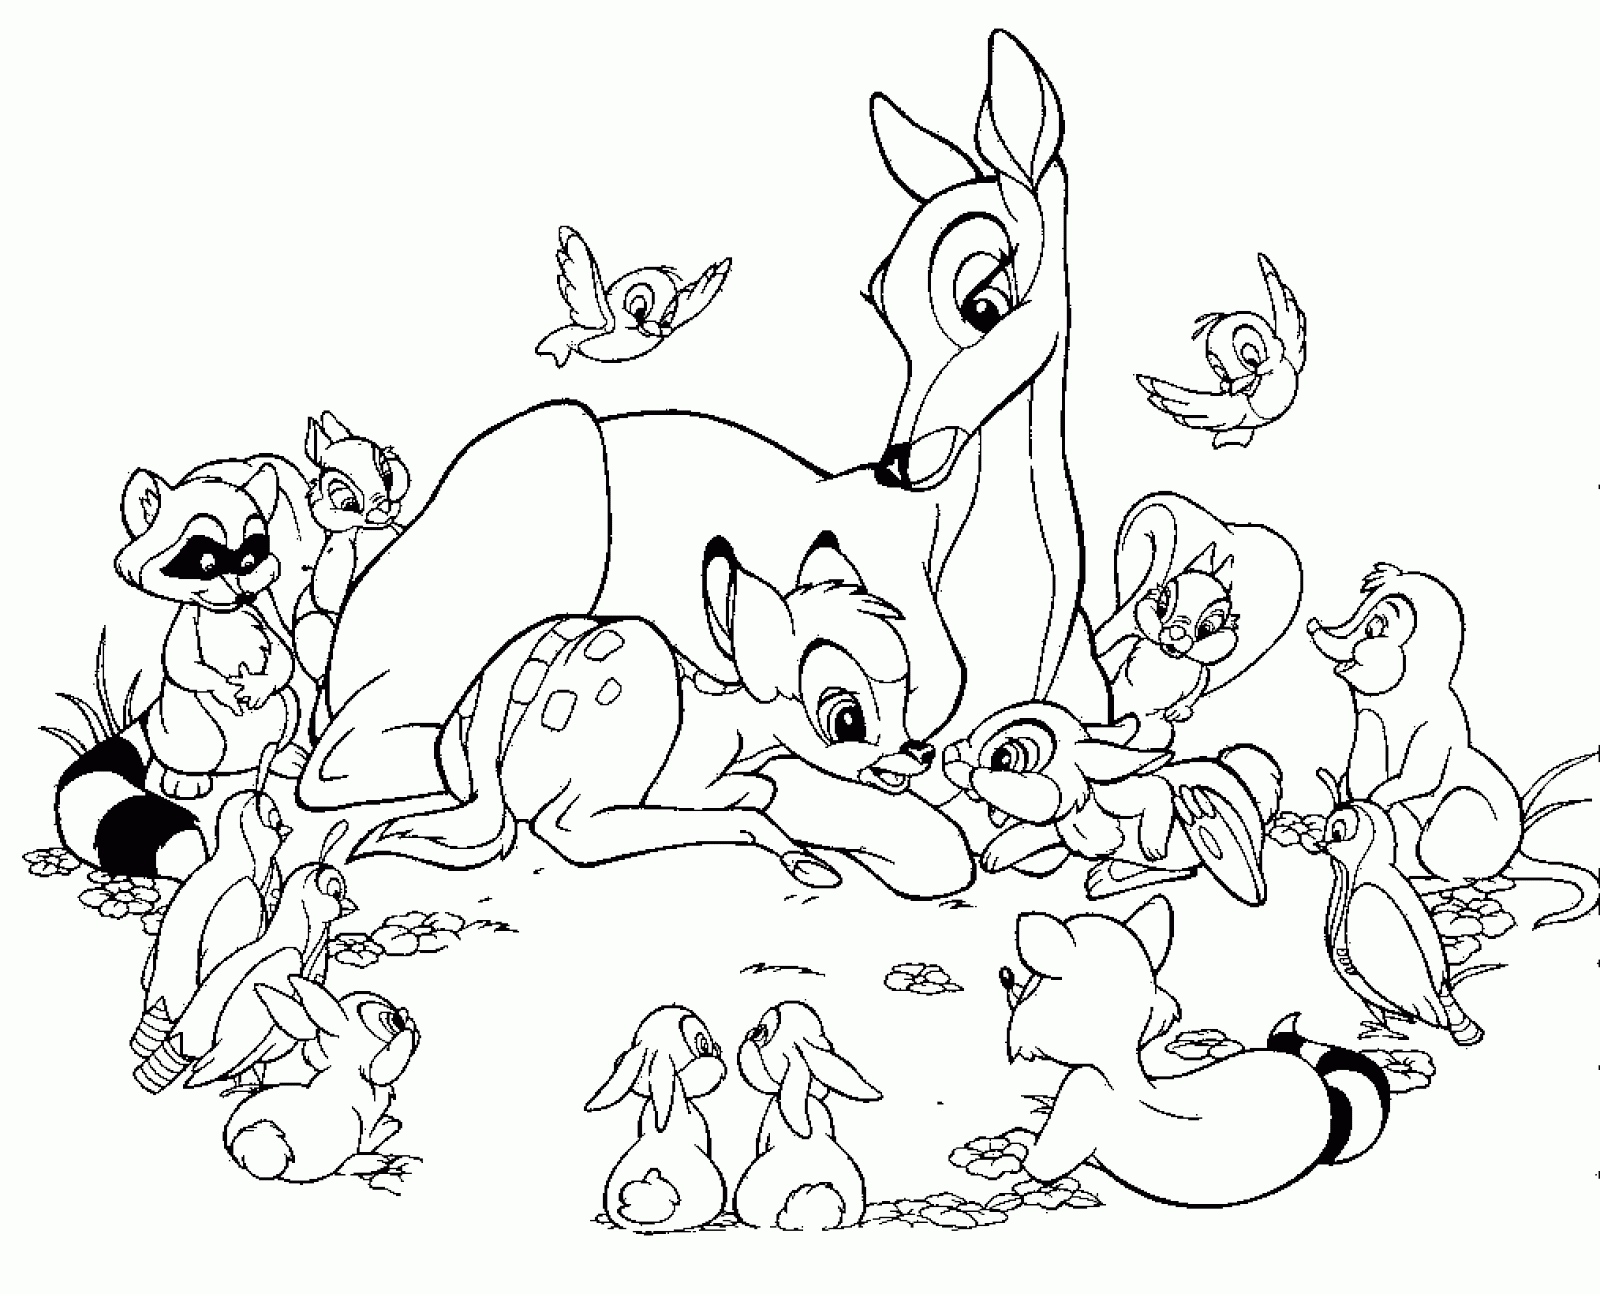 Download Colour Drawing Free HD Wallpapers: Disney Cartoon Bambi Coloring Page Free wallpaper